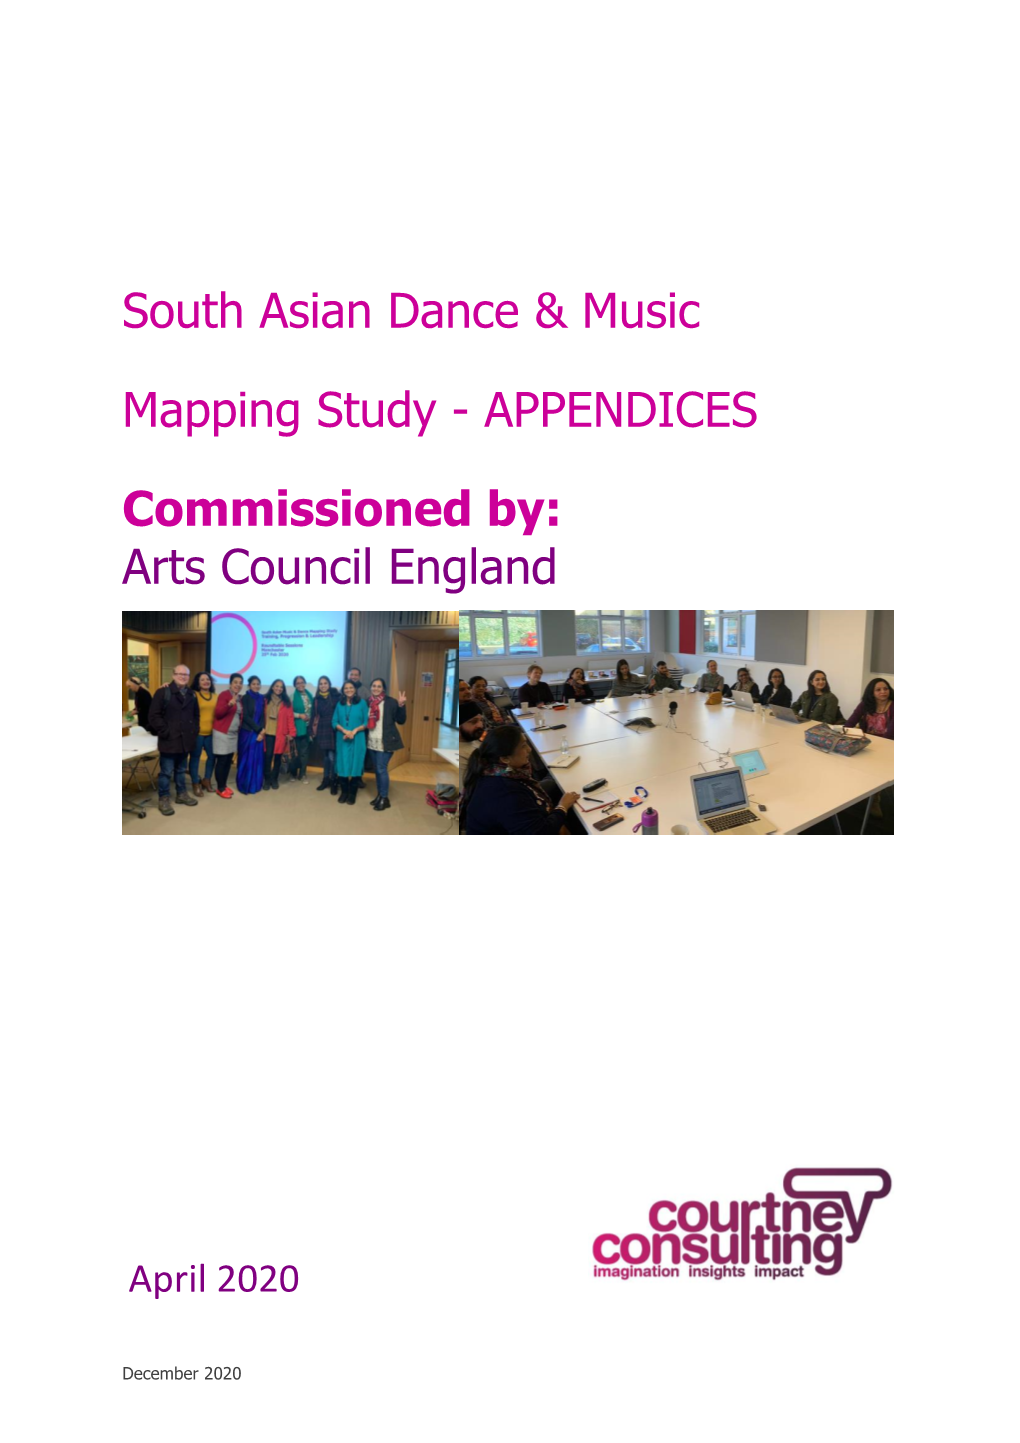 South Asian Dance & Music Mapping Study